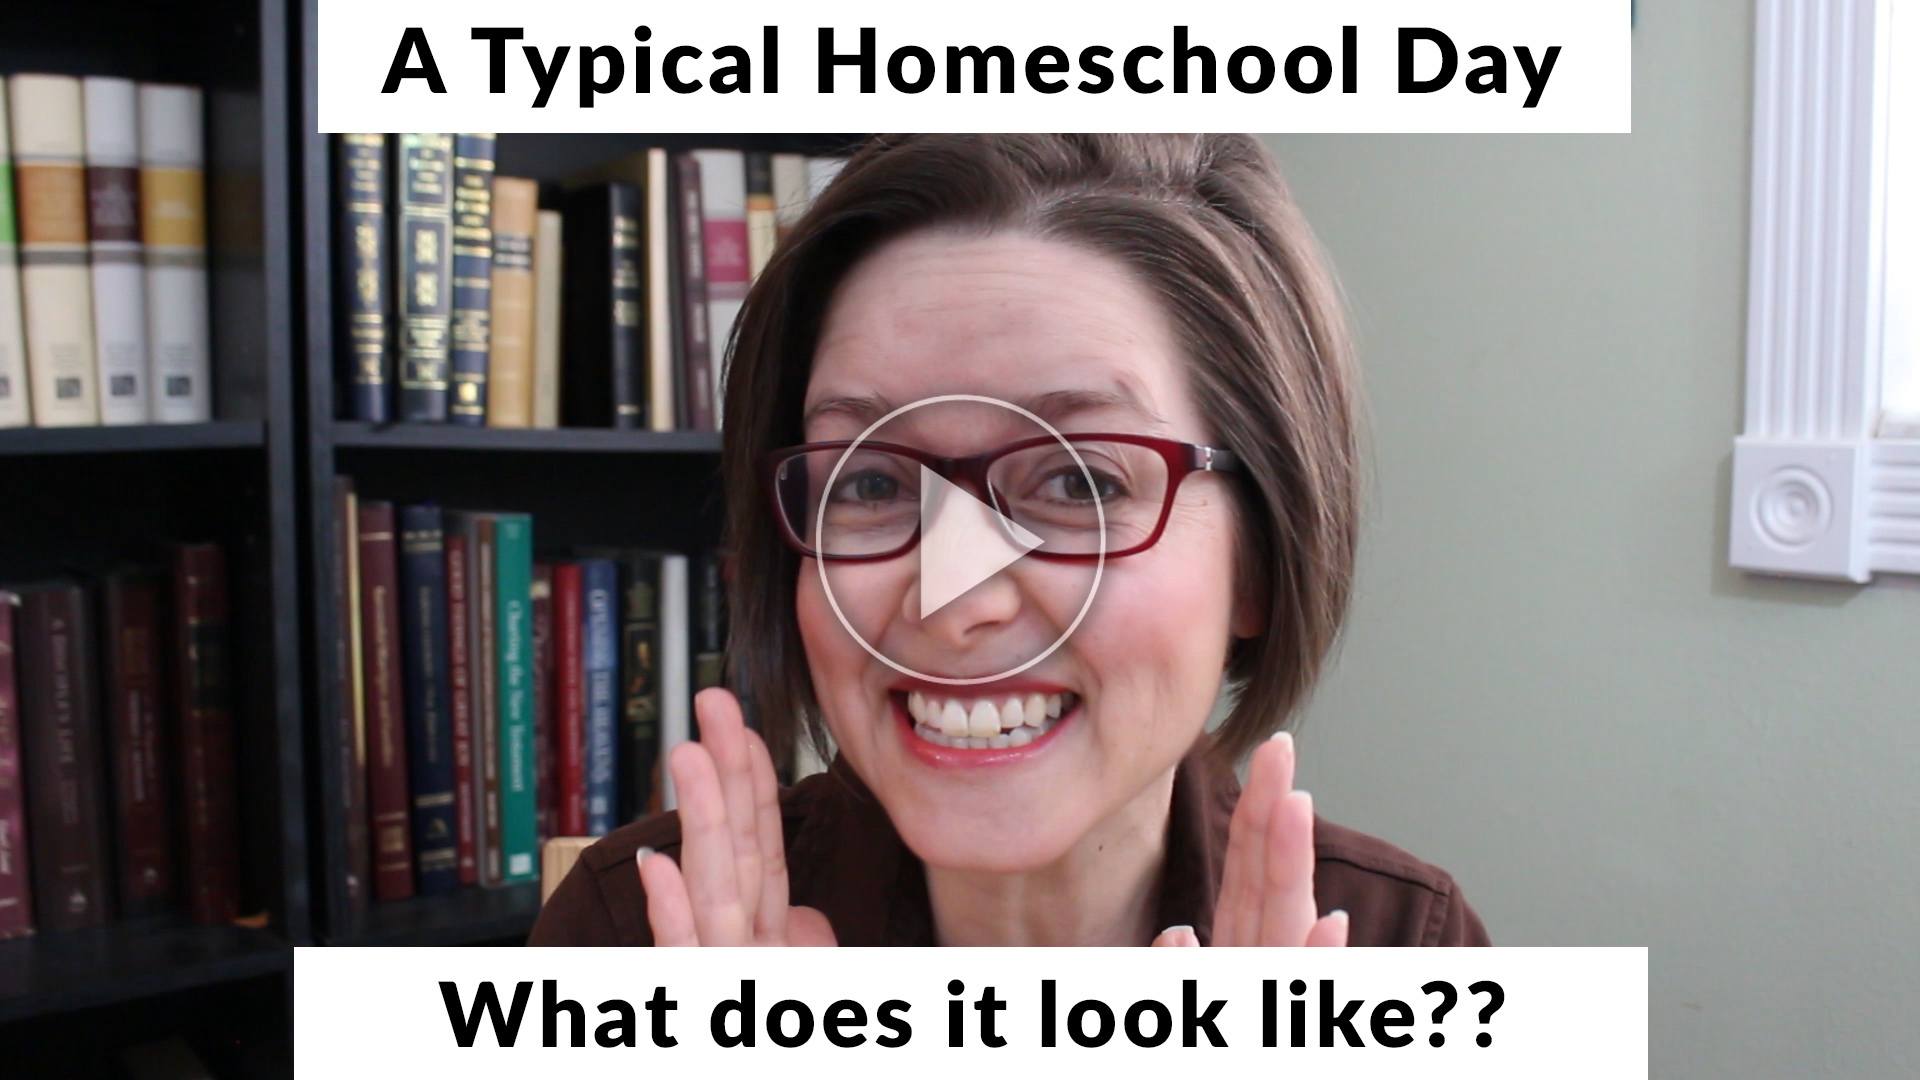 There are ways to put together a homeschool schedule that works. And you can do it without losing the flexibility that homeschool offers AND requires. Today I’m sharing what a “typical” homeschool day looks like. | Homeschool schedule | Typical Homeschool Day | Homeschooling Schedule Multiple kids | Day in the life of a homeschool mom | Homeschool mom routines |